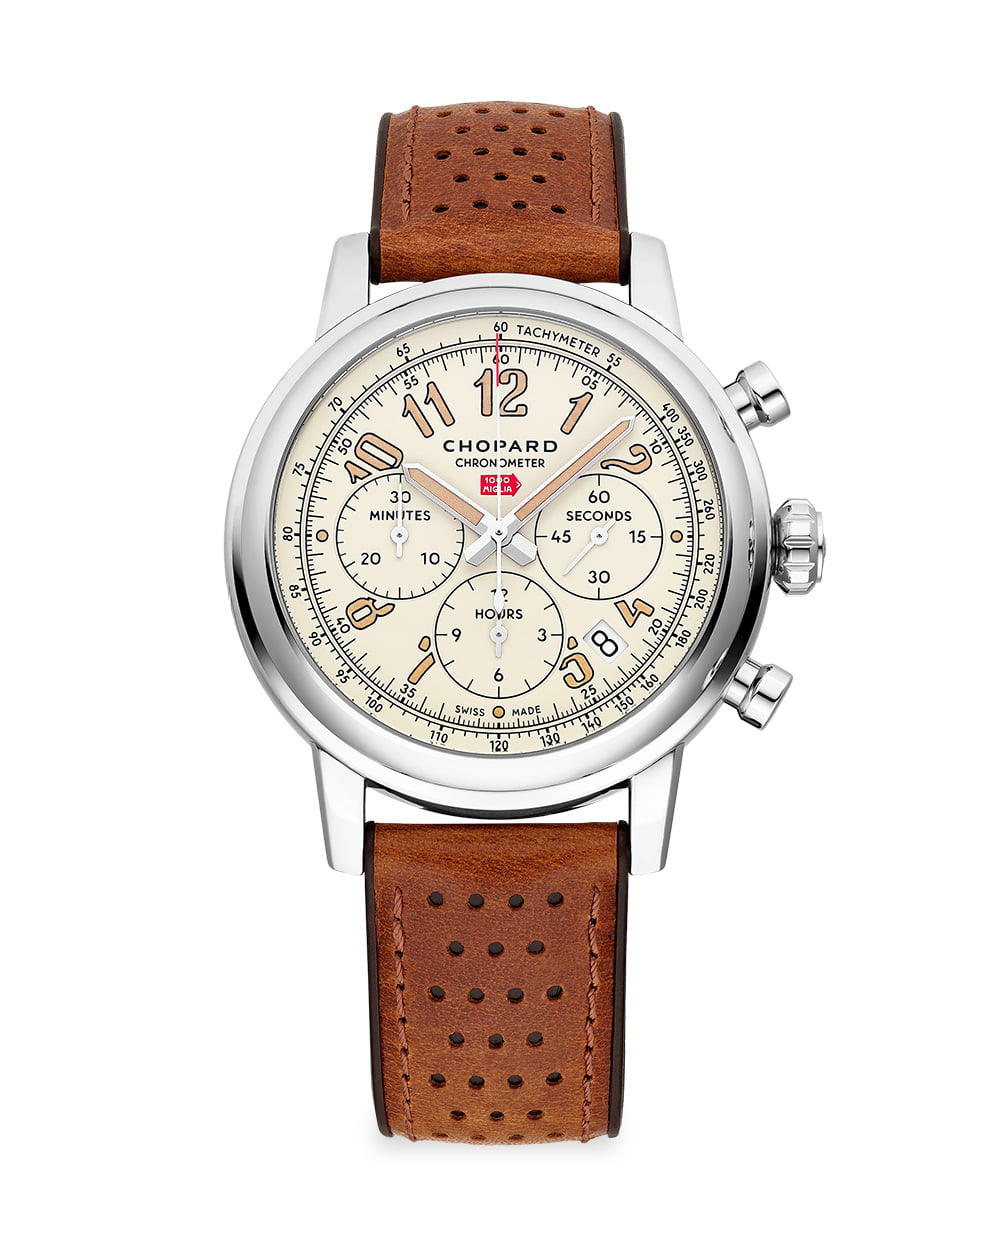 Chopard Mille Miglia Classic Chronograph Raticosa Stainless Steel & Leather Strap Watch